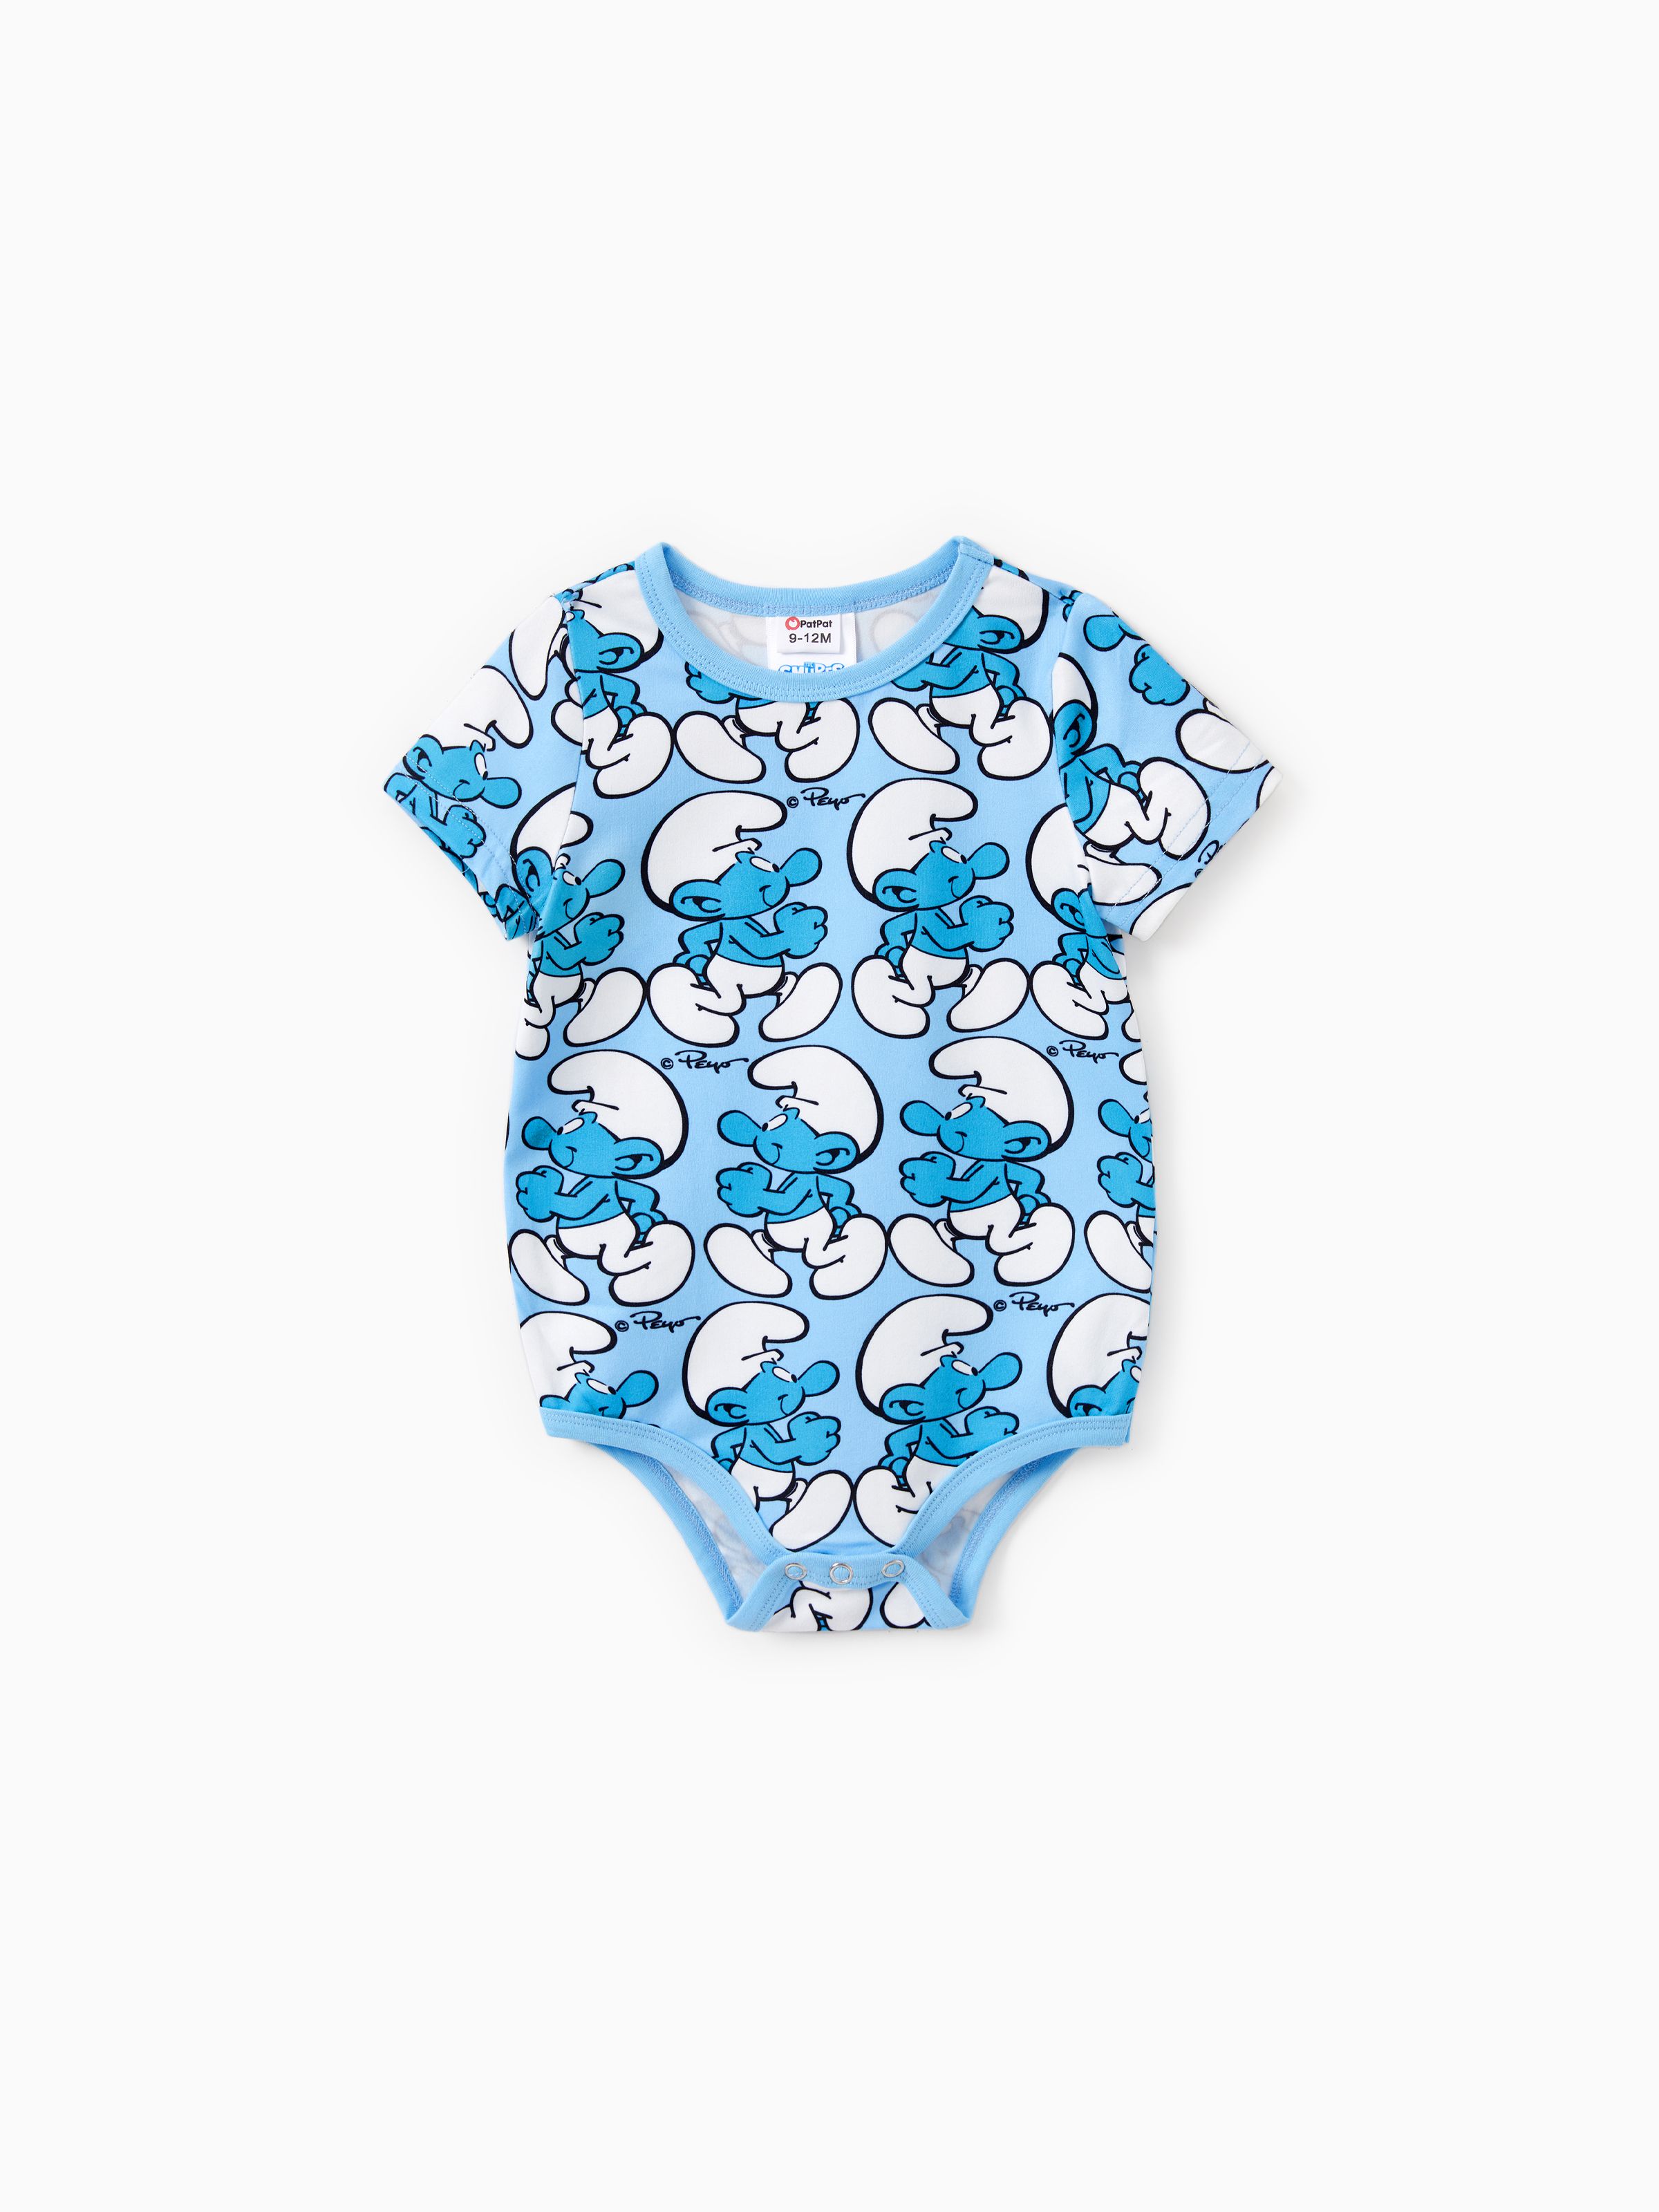 

The Smurfs Family Matching Character Print Onesie/Sleevelss Dress/Tee